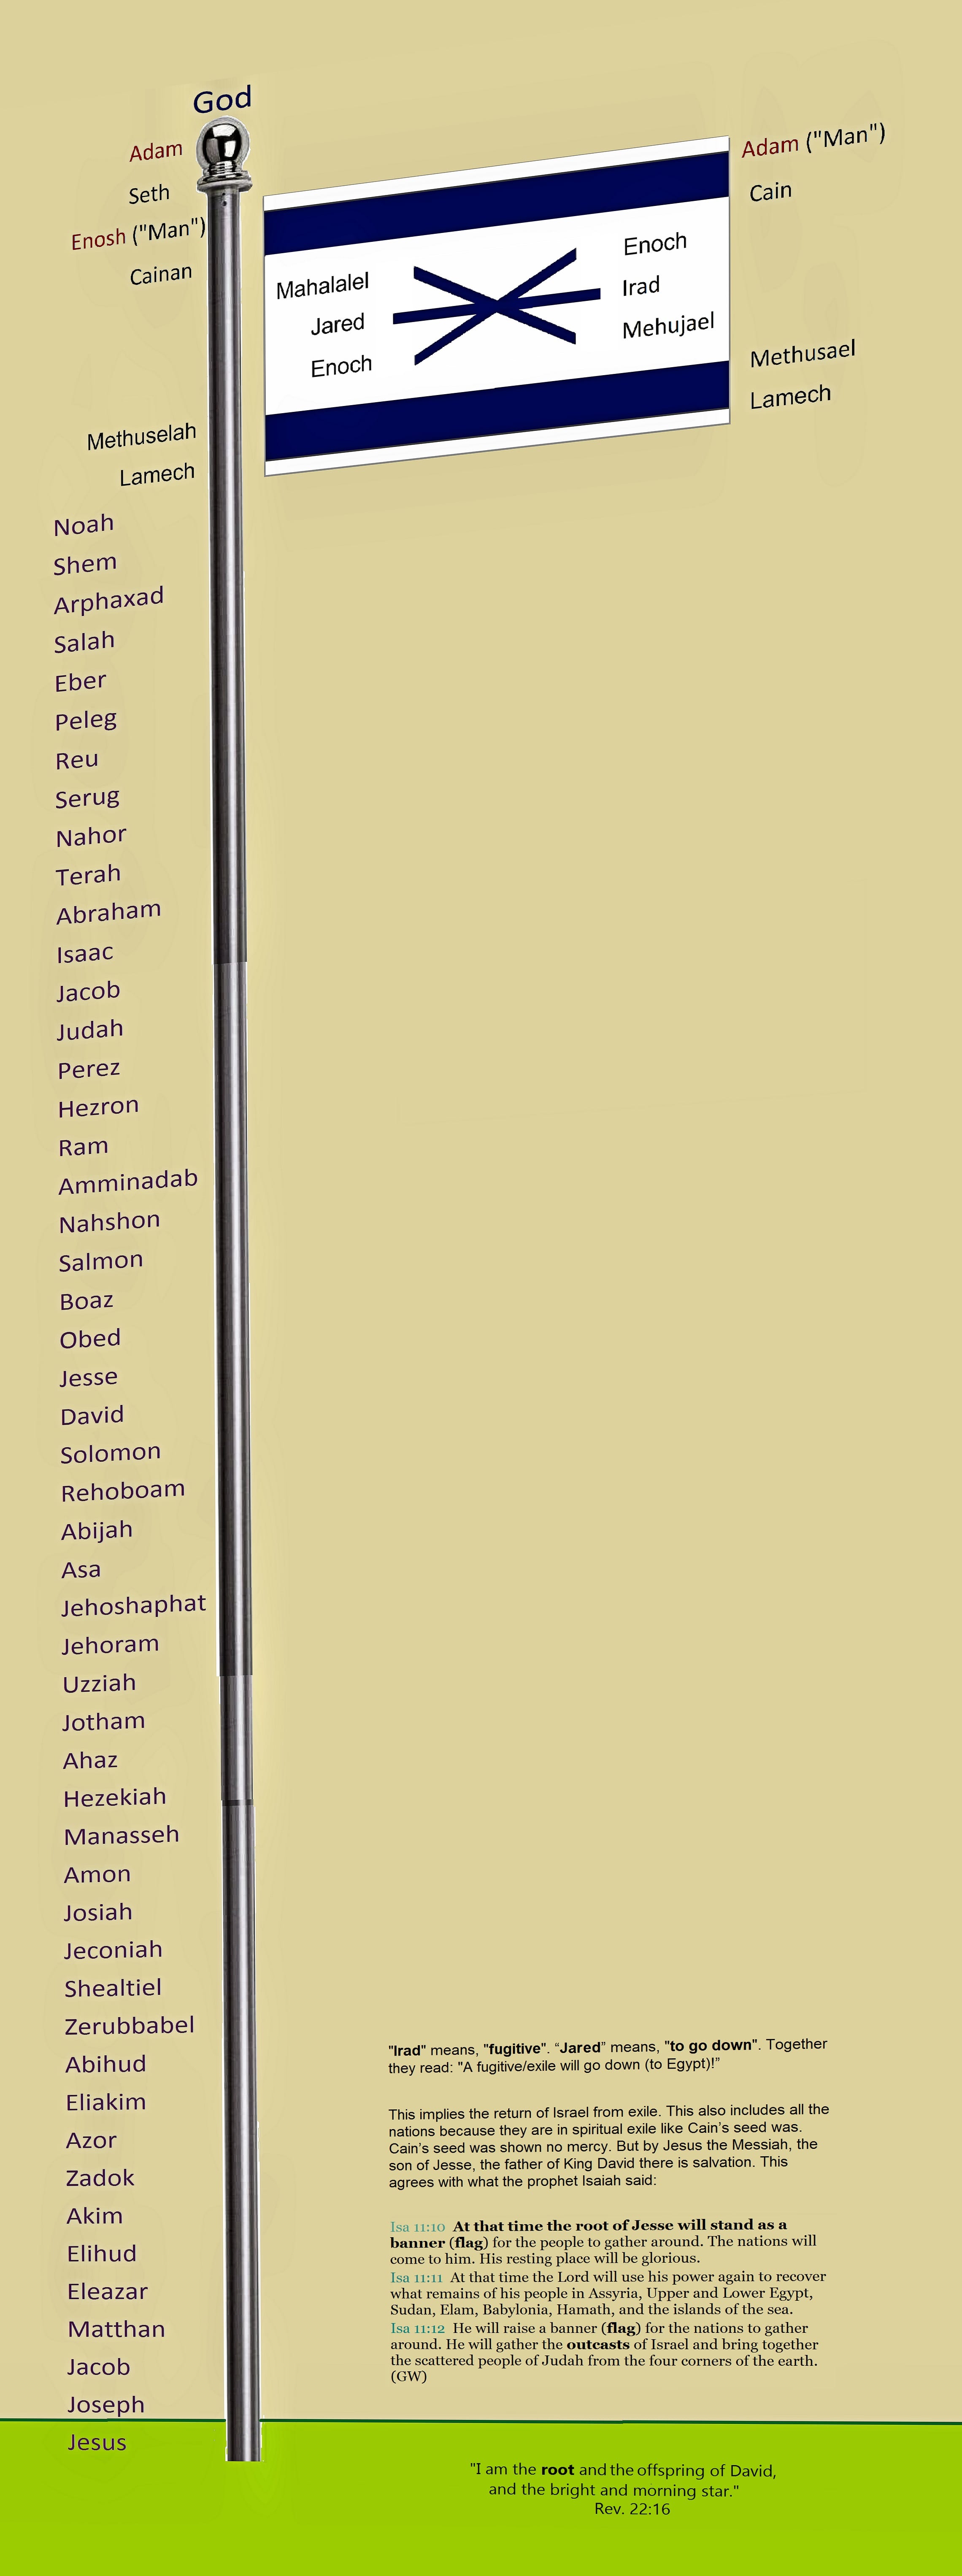 The 77 names from "God" to "Jesus", the "Son of God", which is also 70 names from Enoch. 